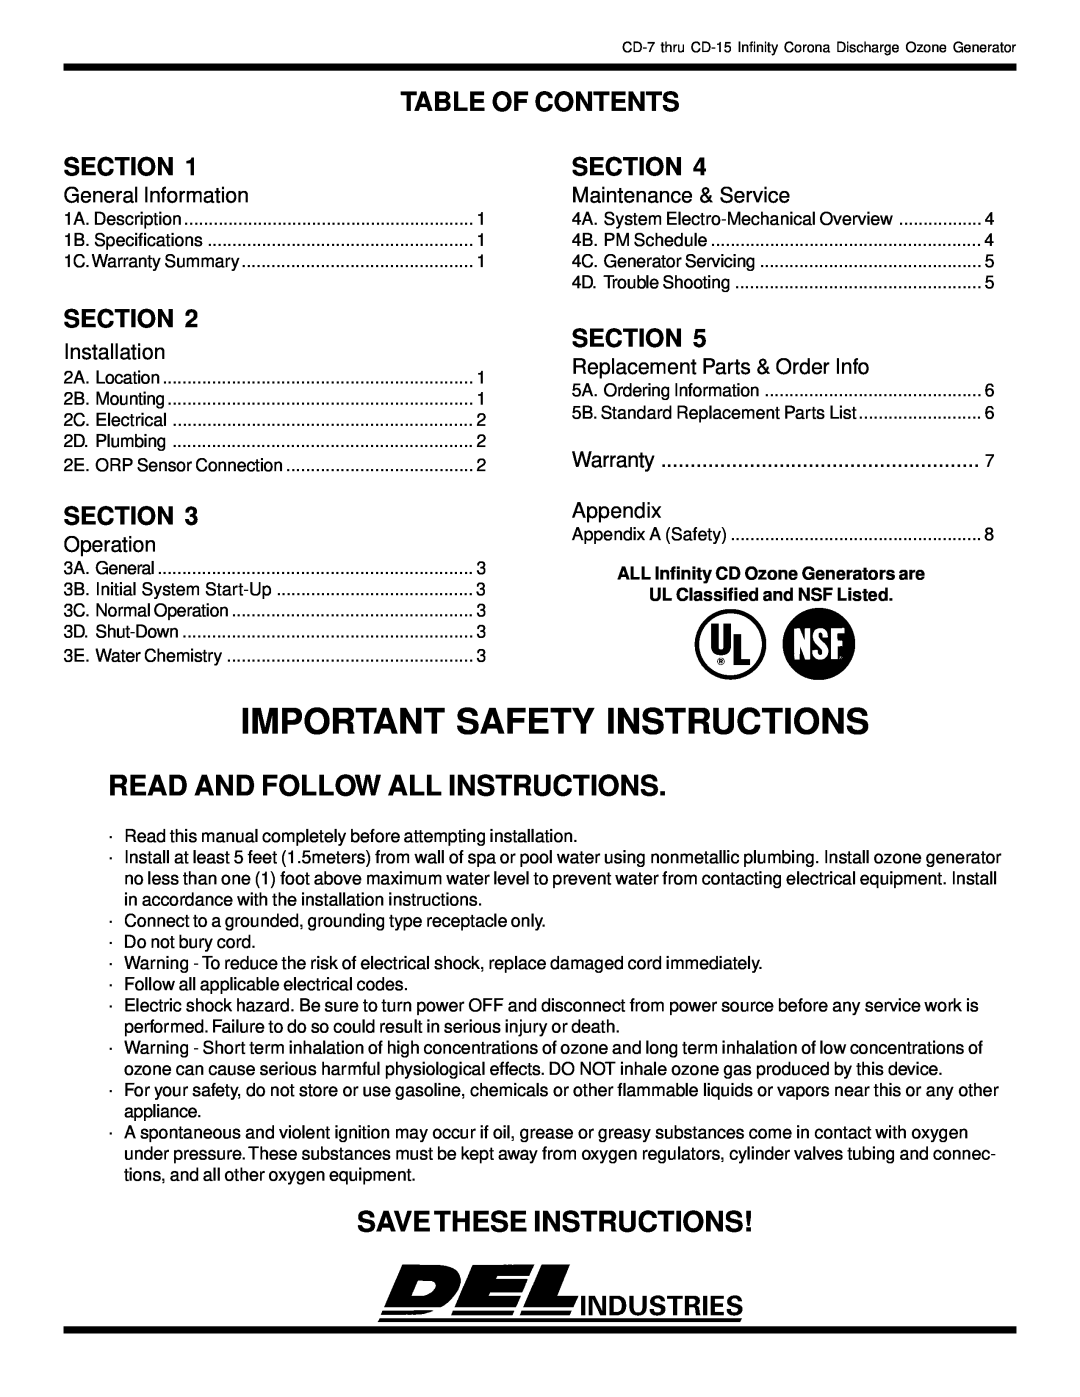 Infinity CD-7 THRU CD-15 Important Safety Instructions, Table Of Contents, Section, General Information, Installation 